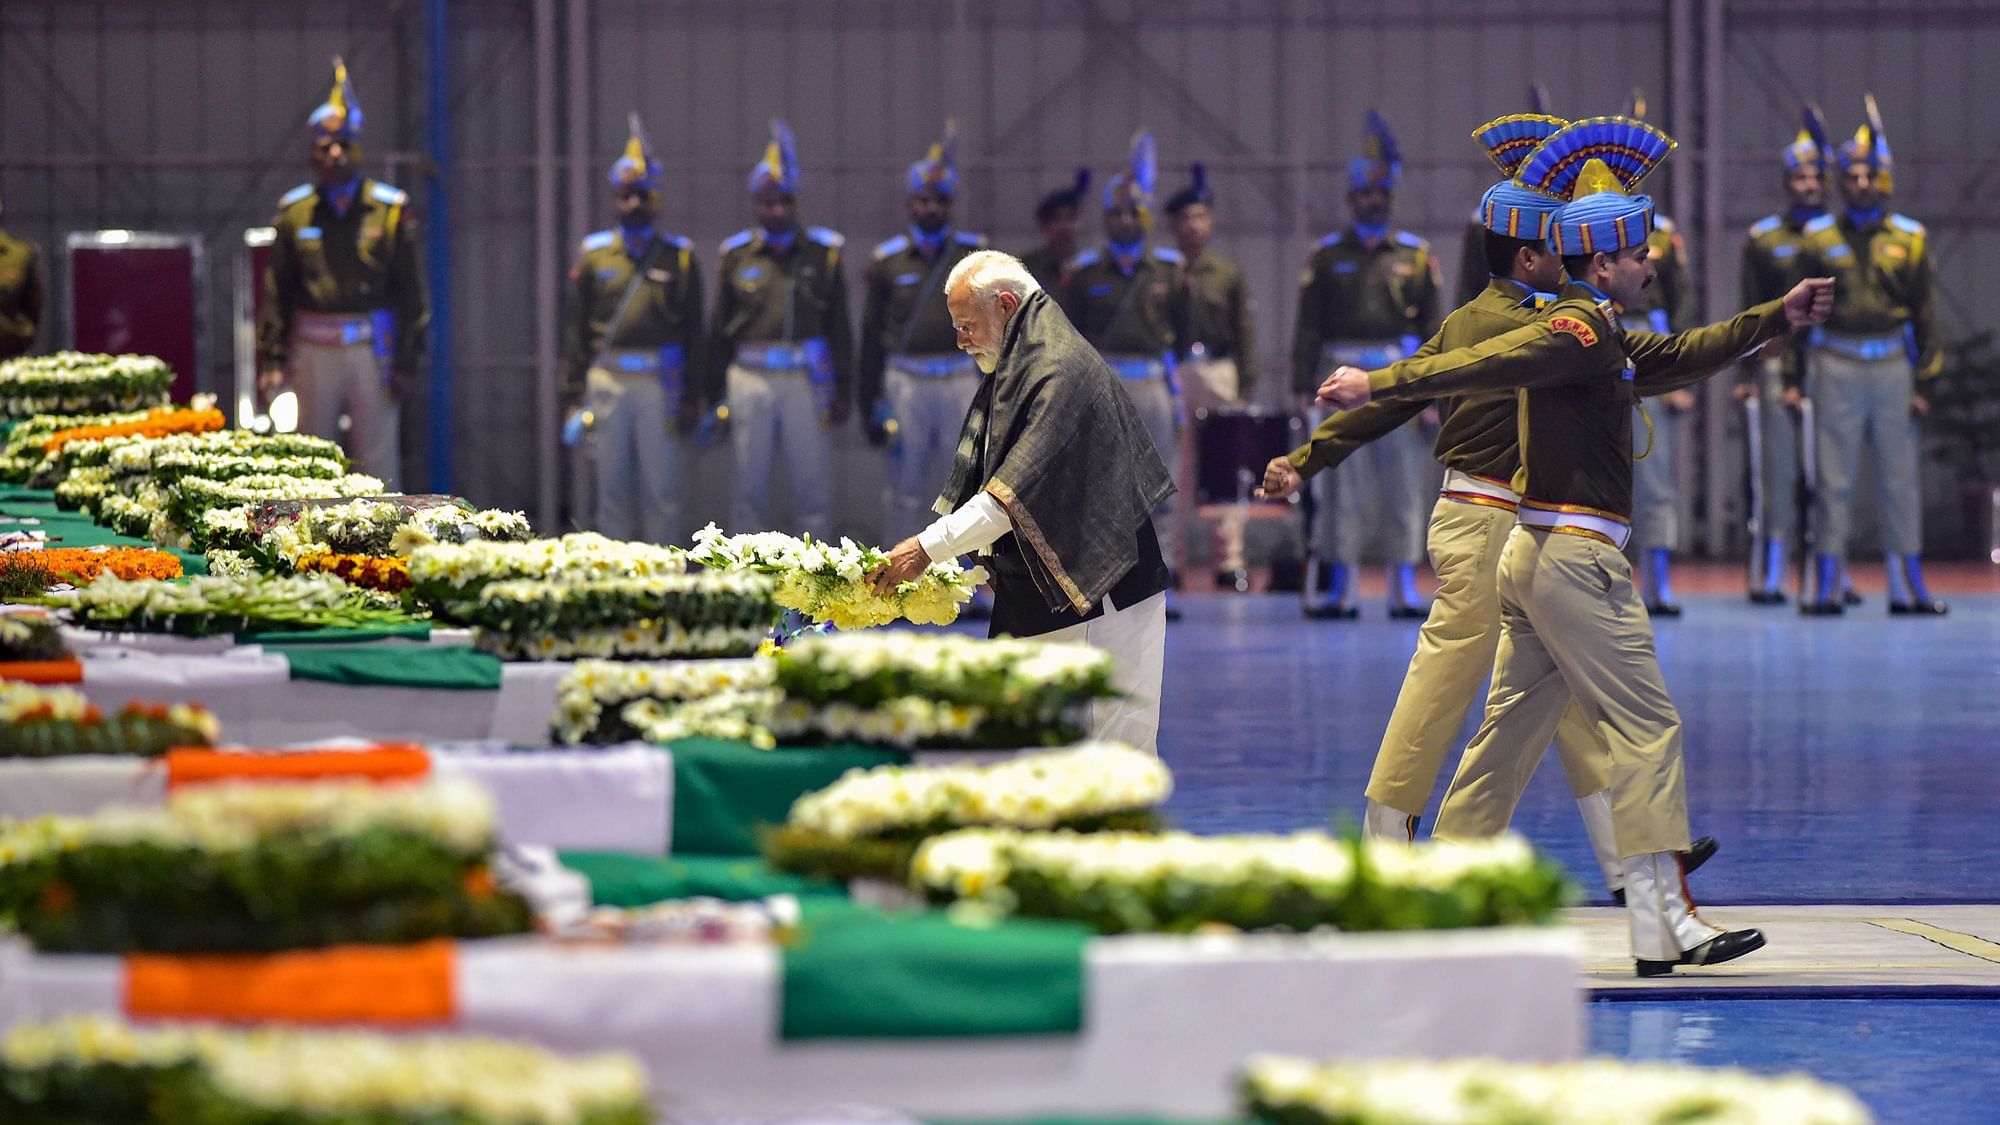 PM Modi pays tribute to the martyred CRPF jawans who lost their lives in the Pulwama terror attack.&nbsp;